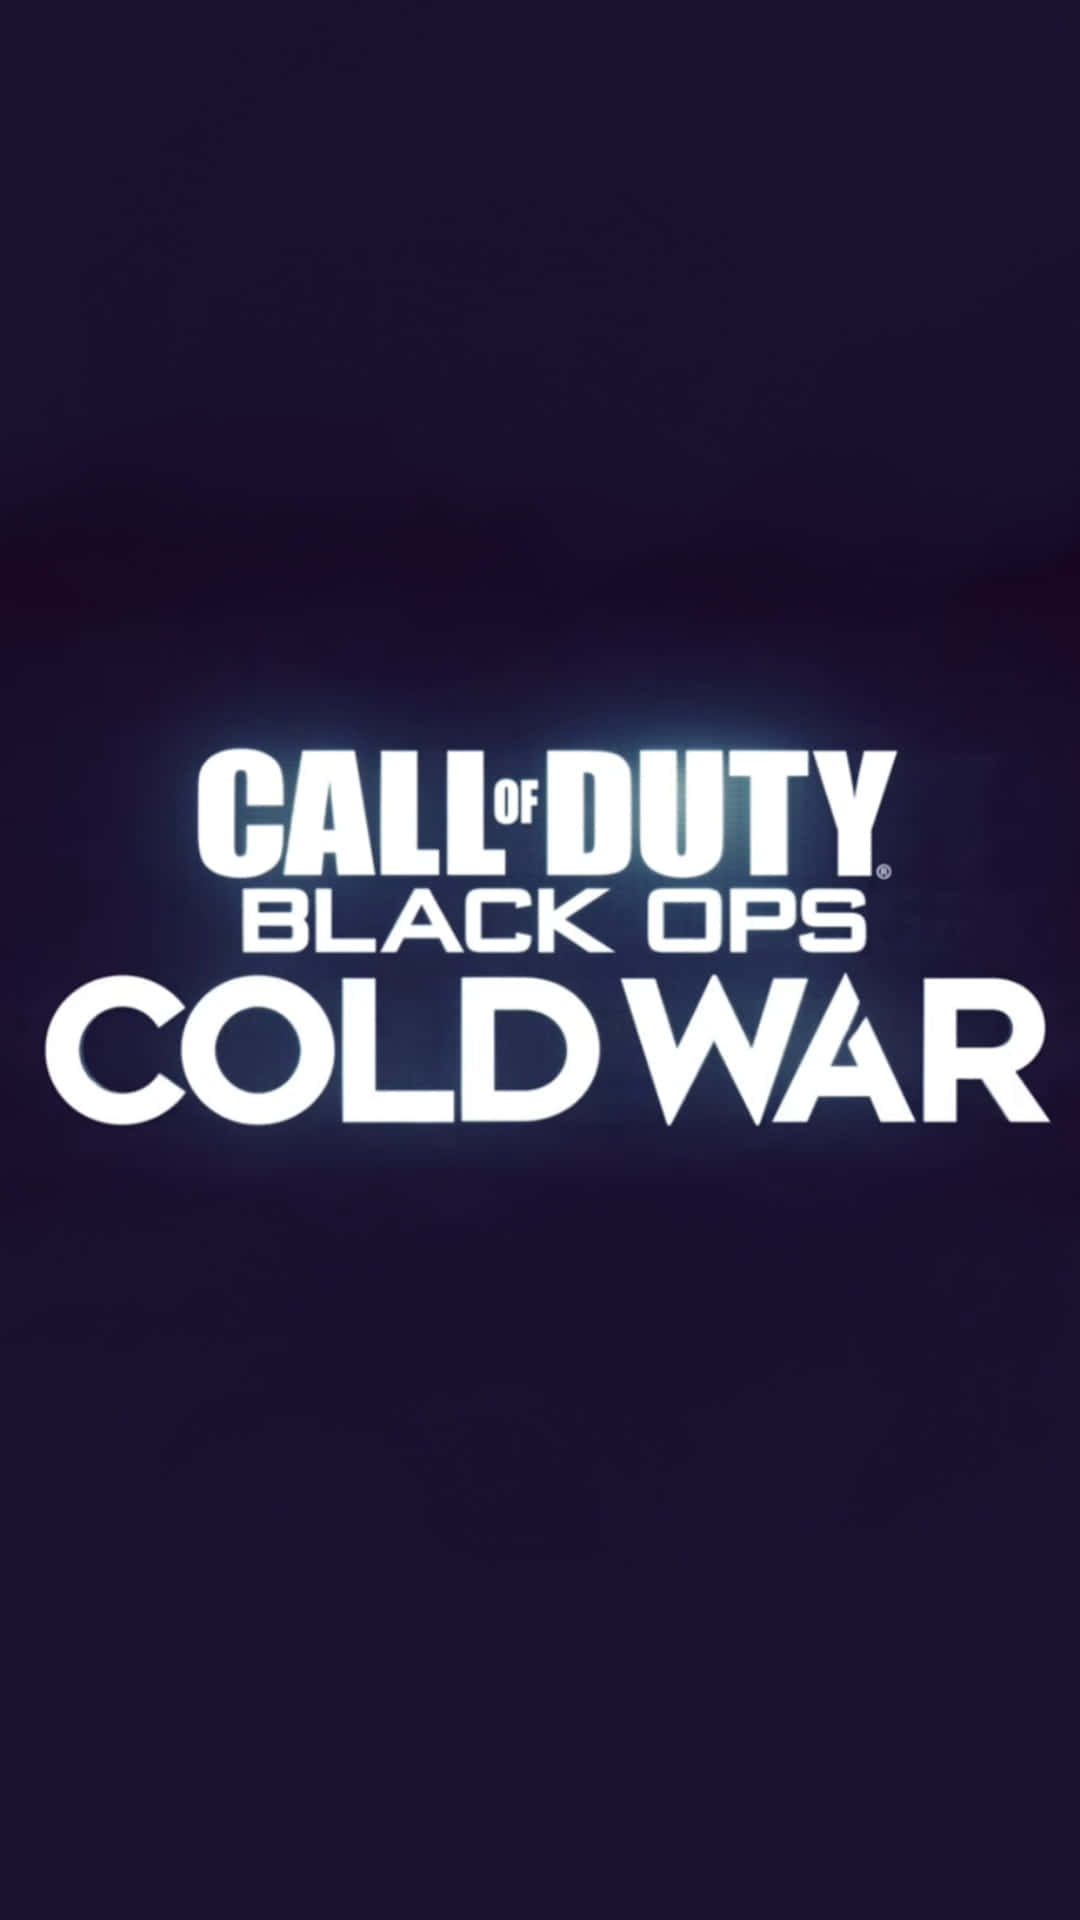 Key Art Hd Call Of Duty Black Ops Cold War Background For Mobile Phone